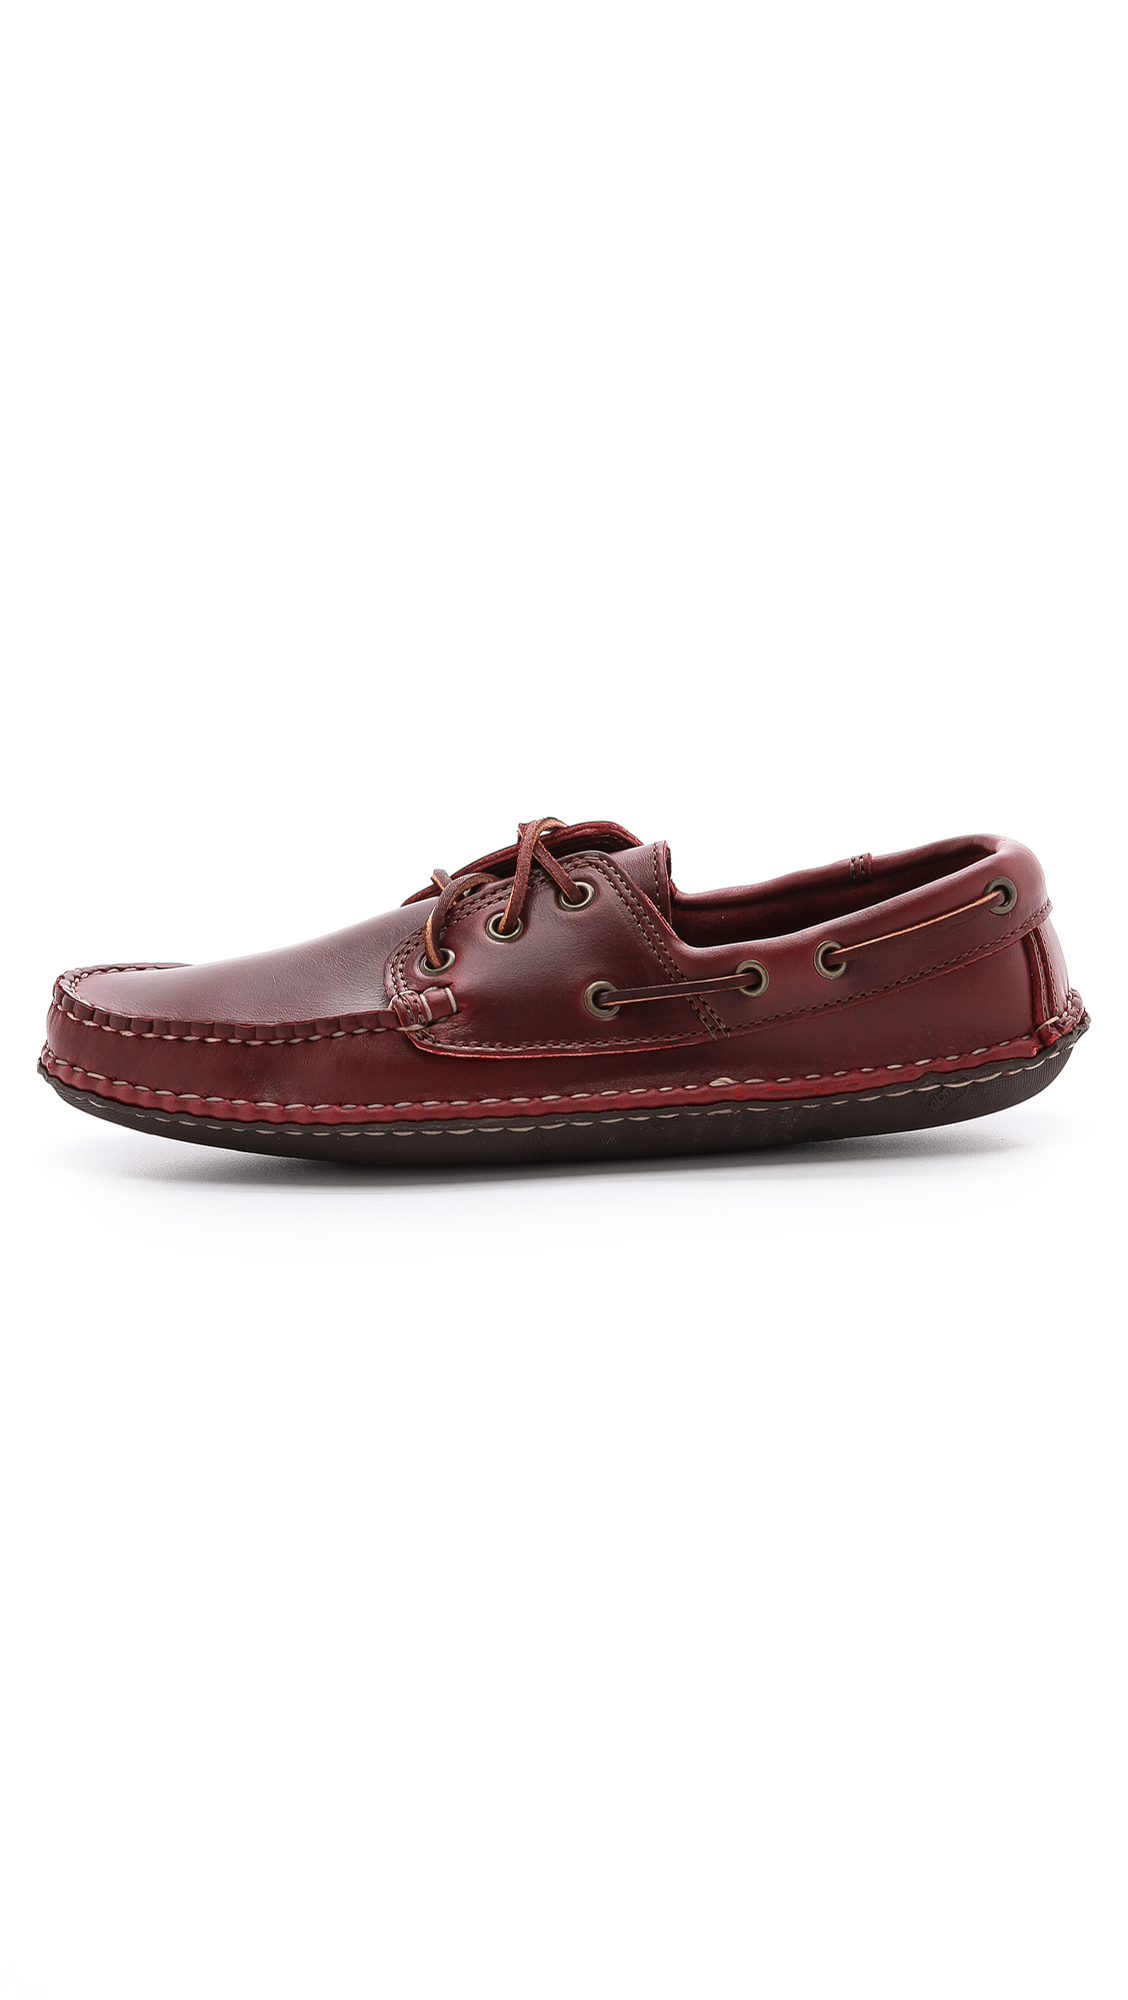 lyst - quoddy boat mocs in brown for men